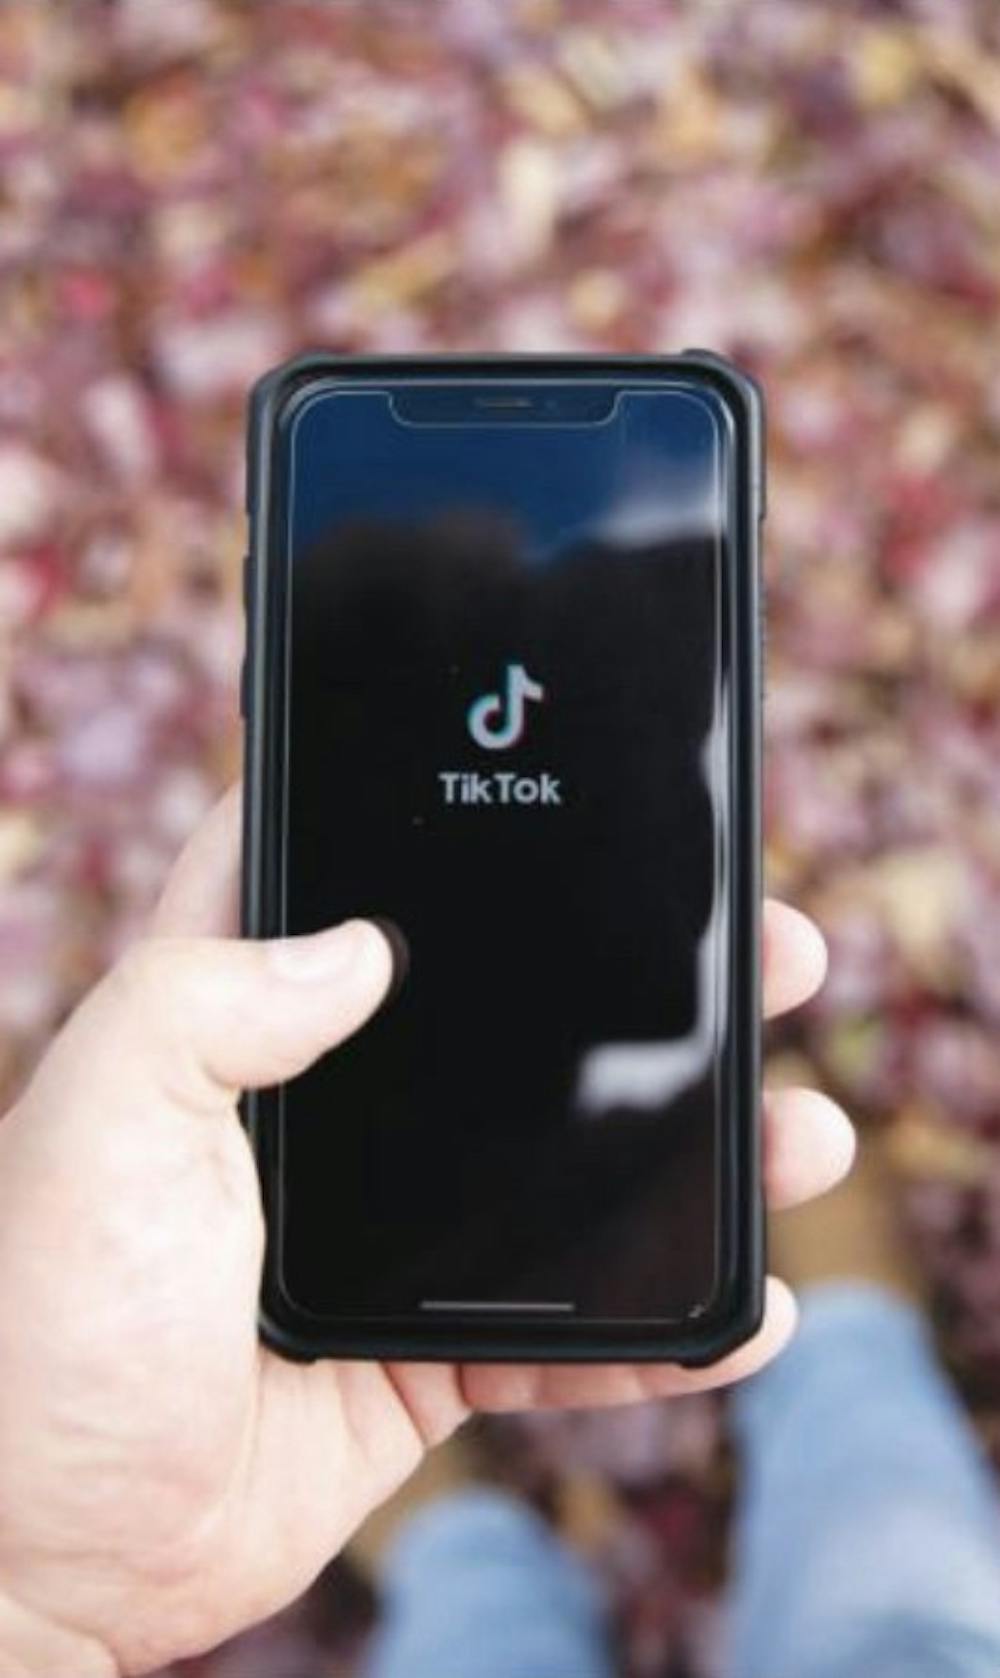 A phone opens TikTok Nov. 10, 2020. TikTok has been downloaded more than 2 billion times in the Apple App Store and Google Play Store. Jacob Musselman, DN Illustration